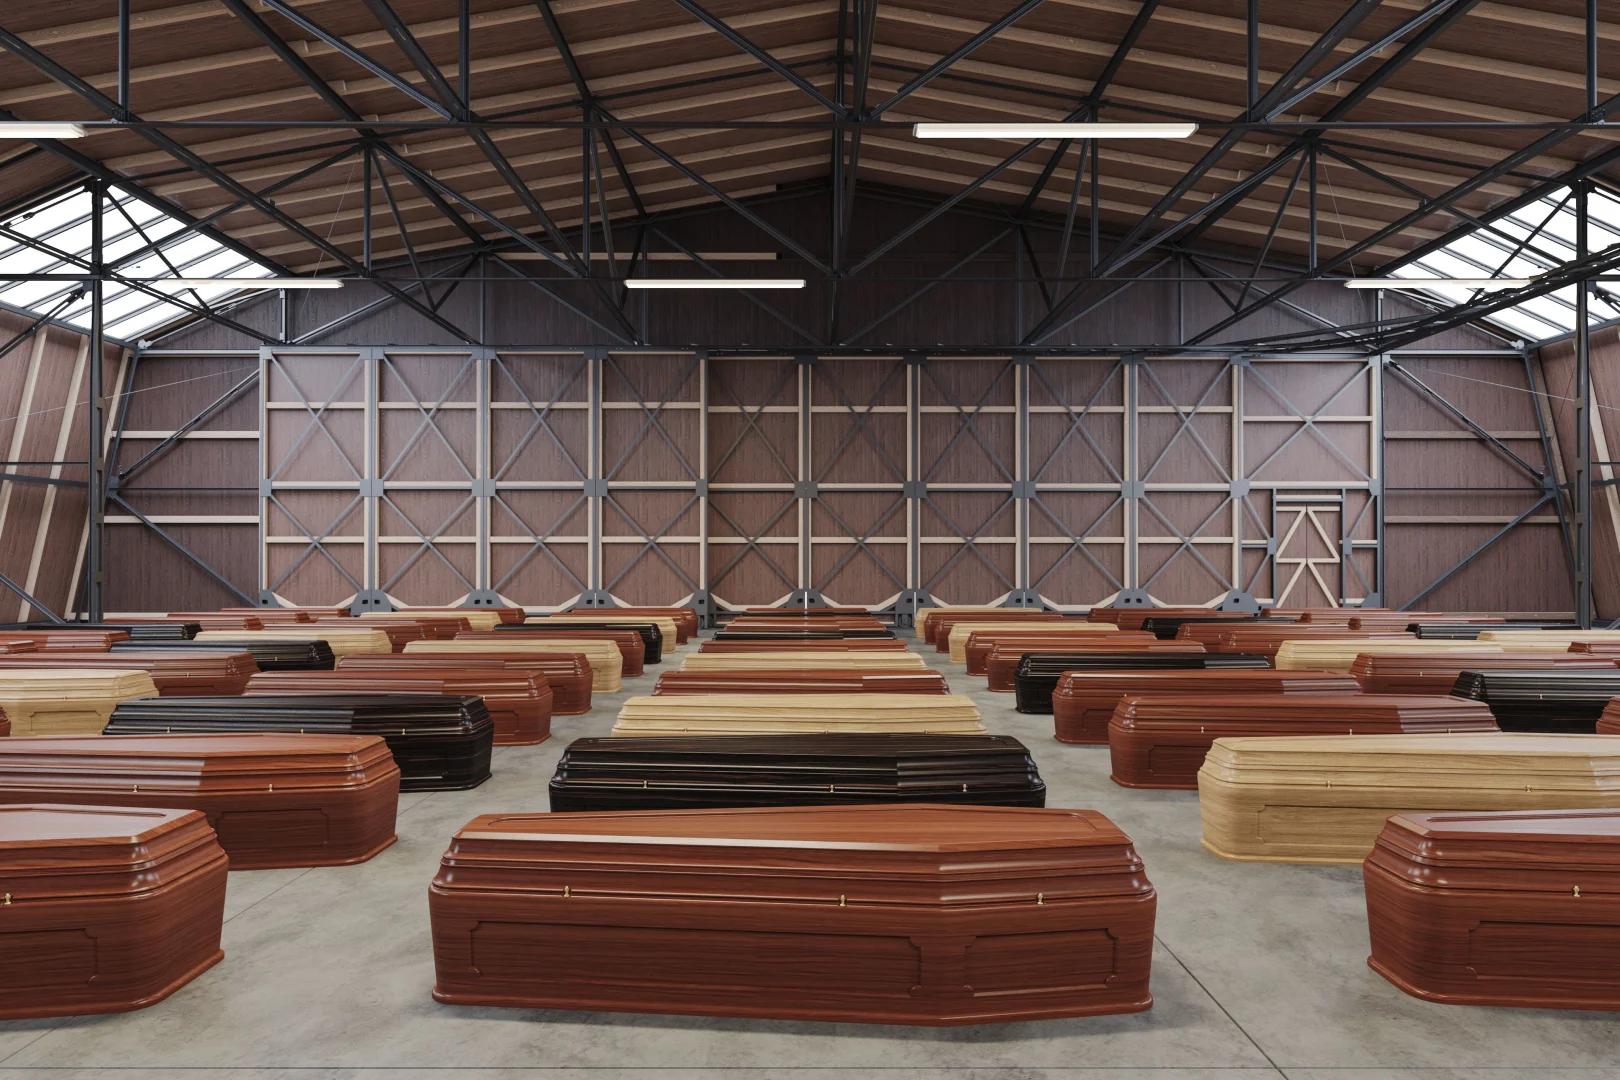 Coffins for children ordered in bulk, 'first time in over 30 years' (interview)